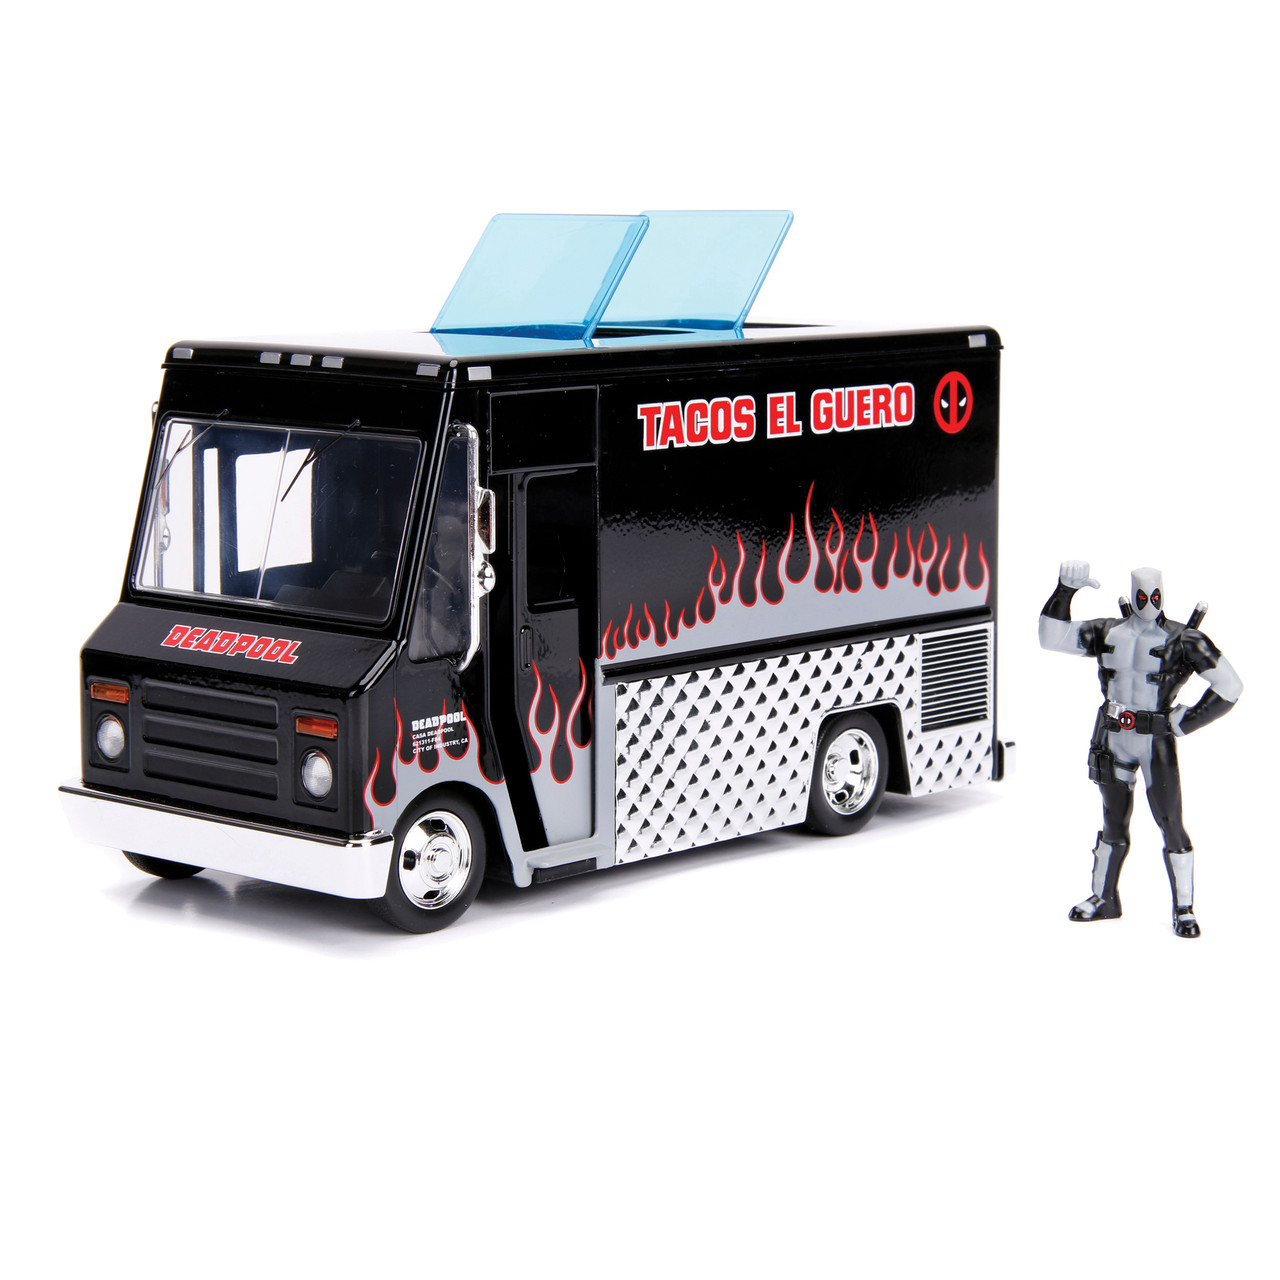 Taco truck deapool 1:24